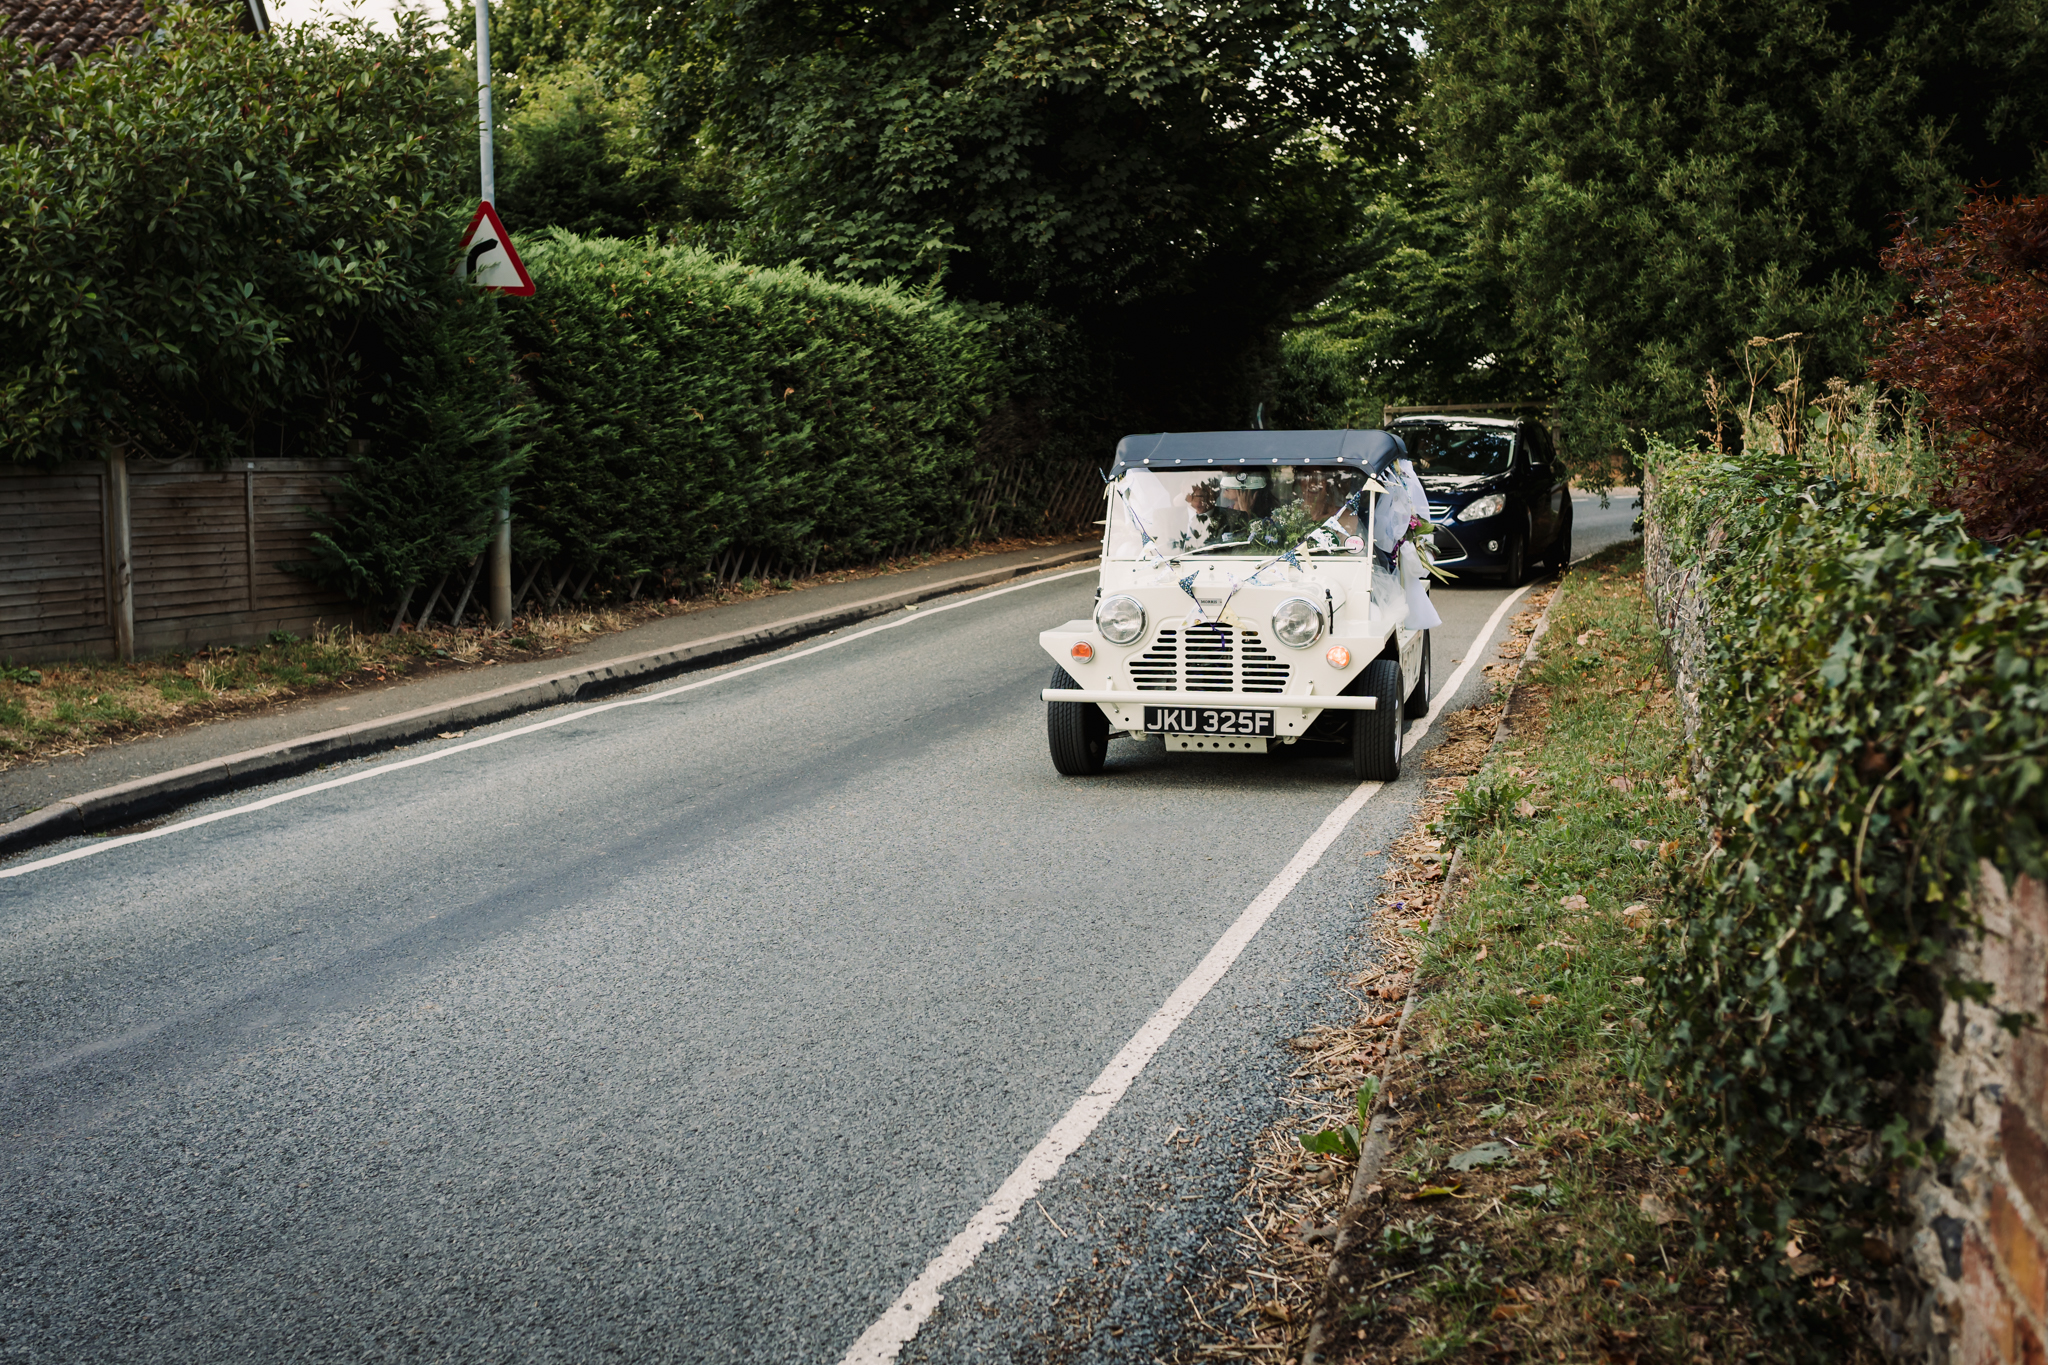 Decorated wedding buggy makes it way to hertfordshire garden party wedding